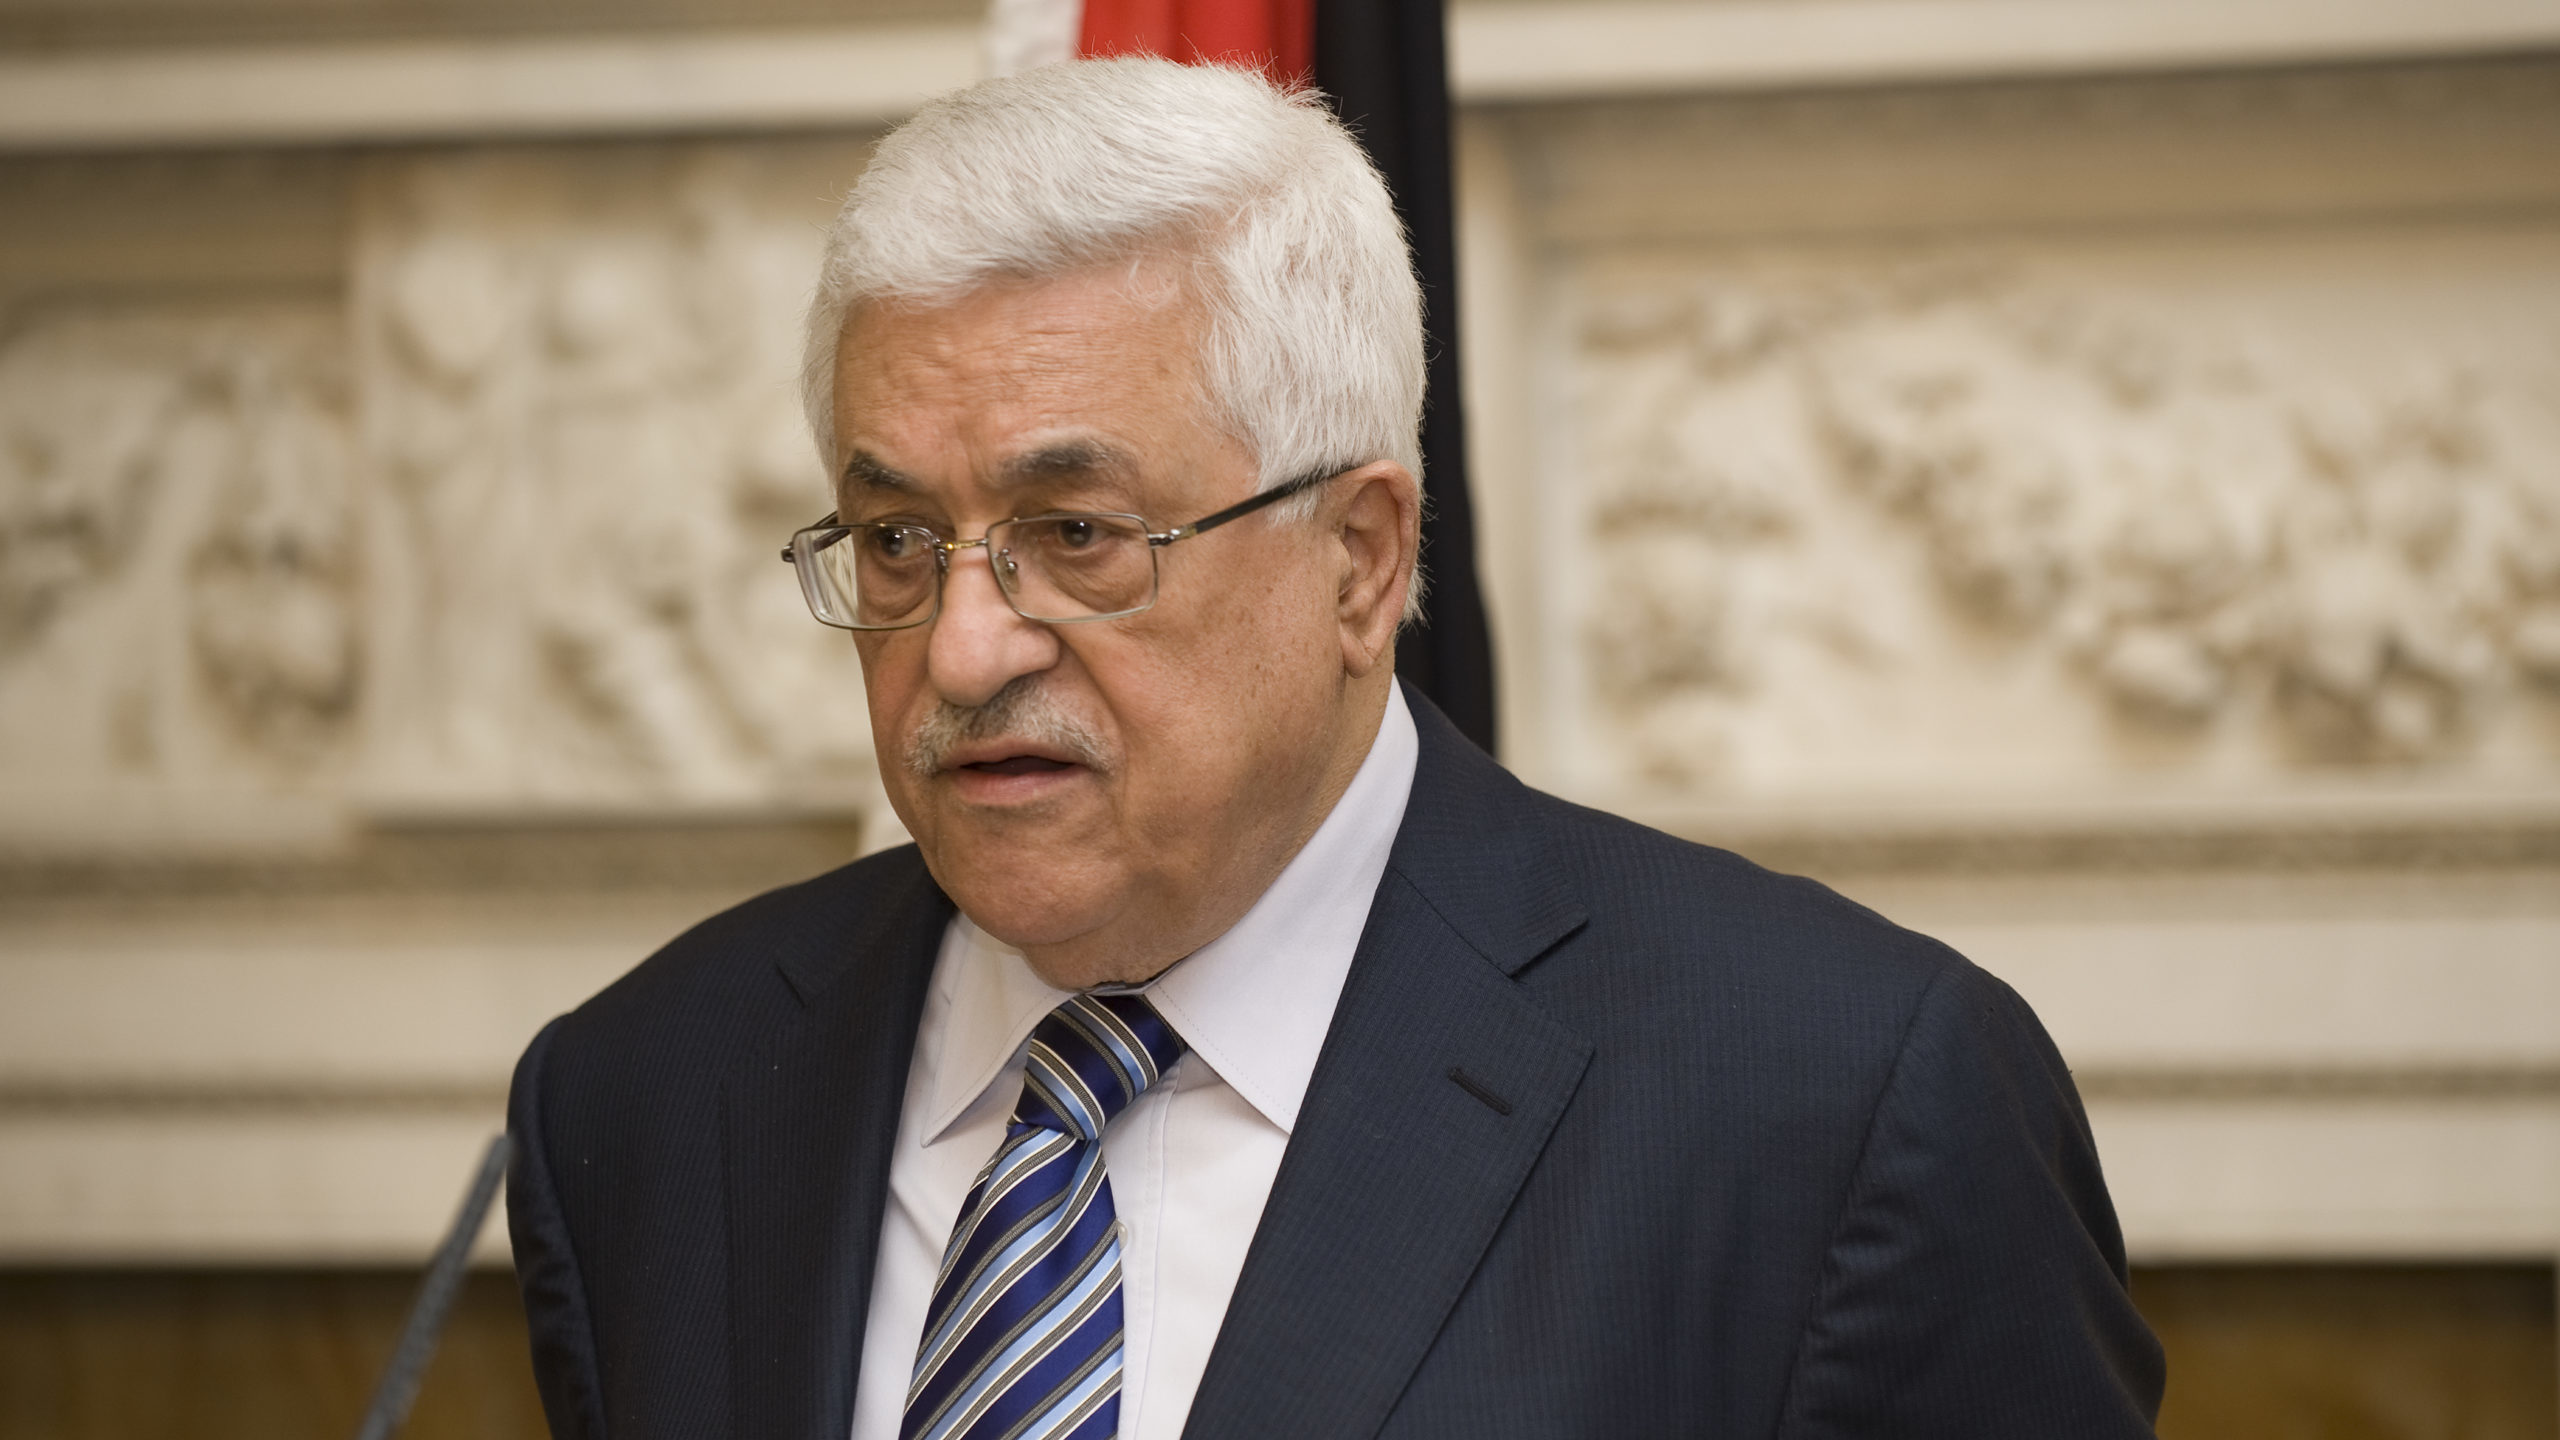 Pro-Abbas Palestinians Show Support for Their President